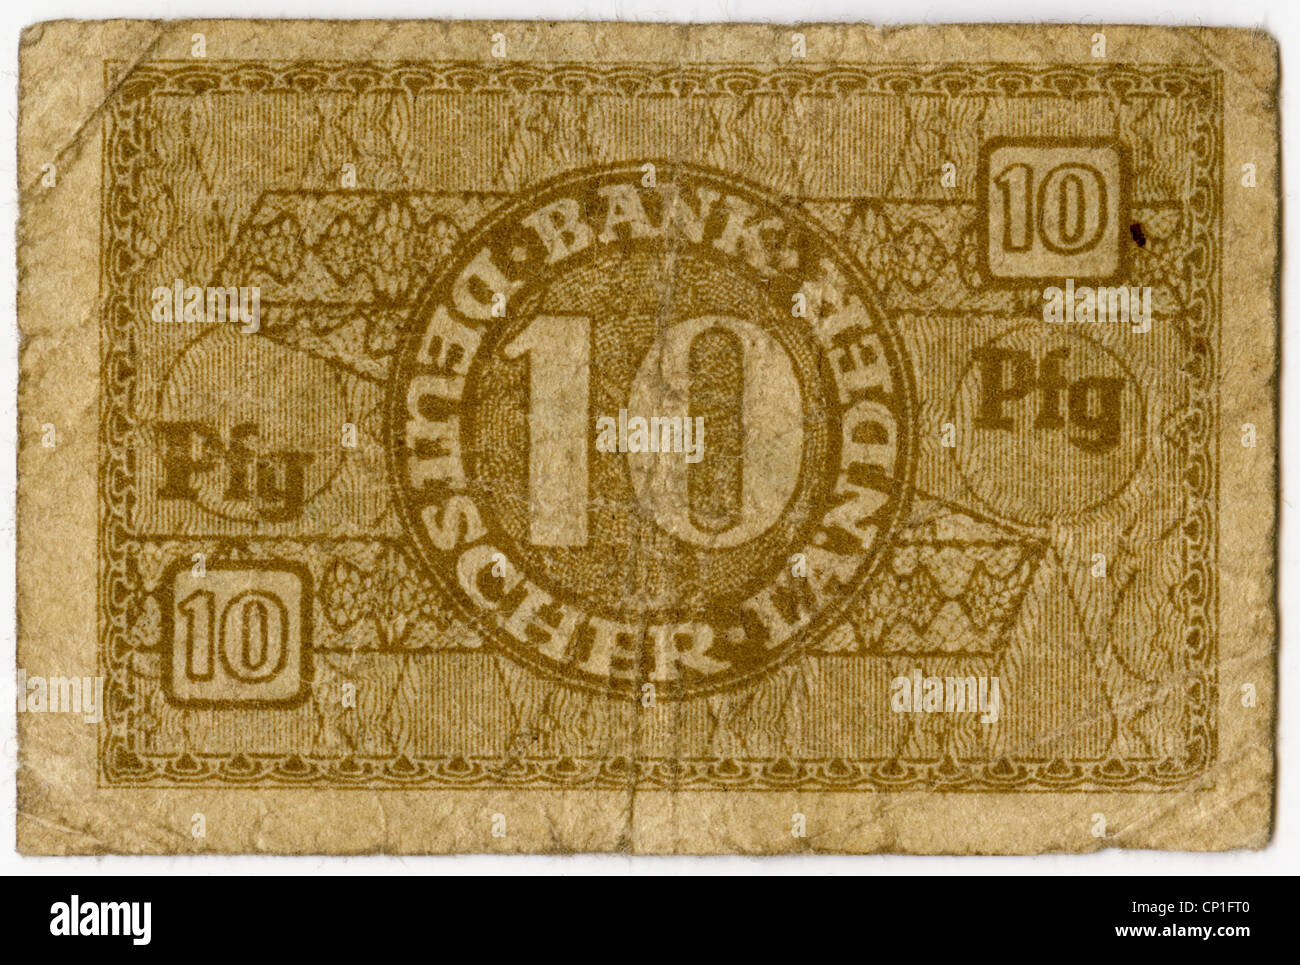 money/finance, bank notes, Germany, 10 Pfennig bank note, Bank Deutscher  Länder, 1948, Additional-Rights-Clearences-Not Available Stock Photo - Alamy